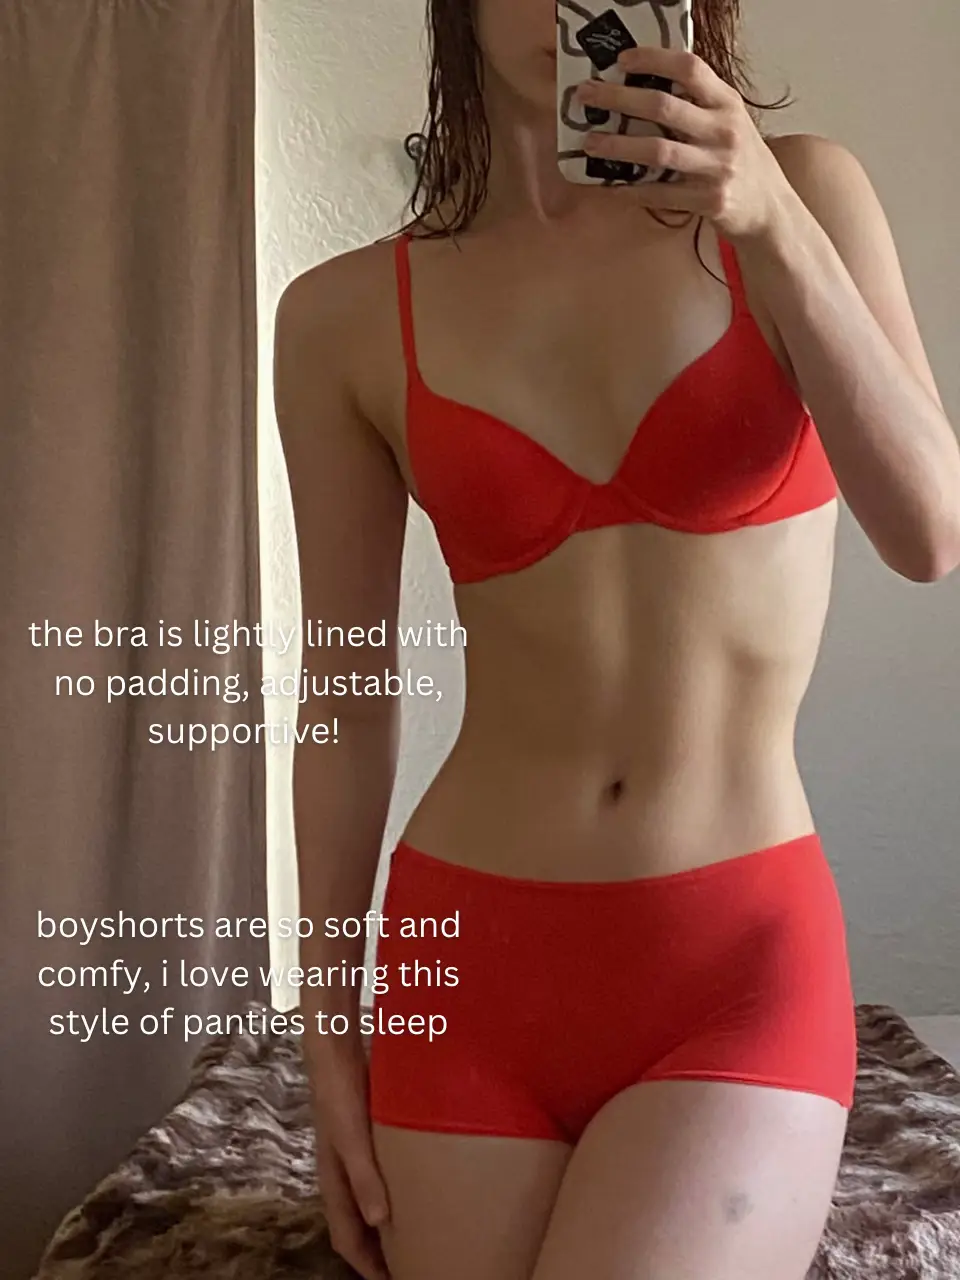 Review: I Tried the Smooth Essentials Boyshort From SKIMS